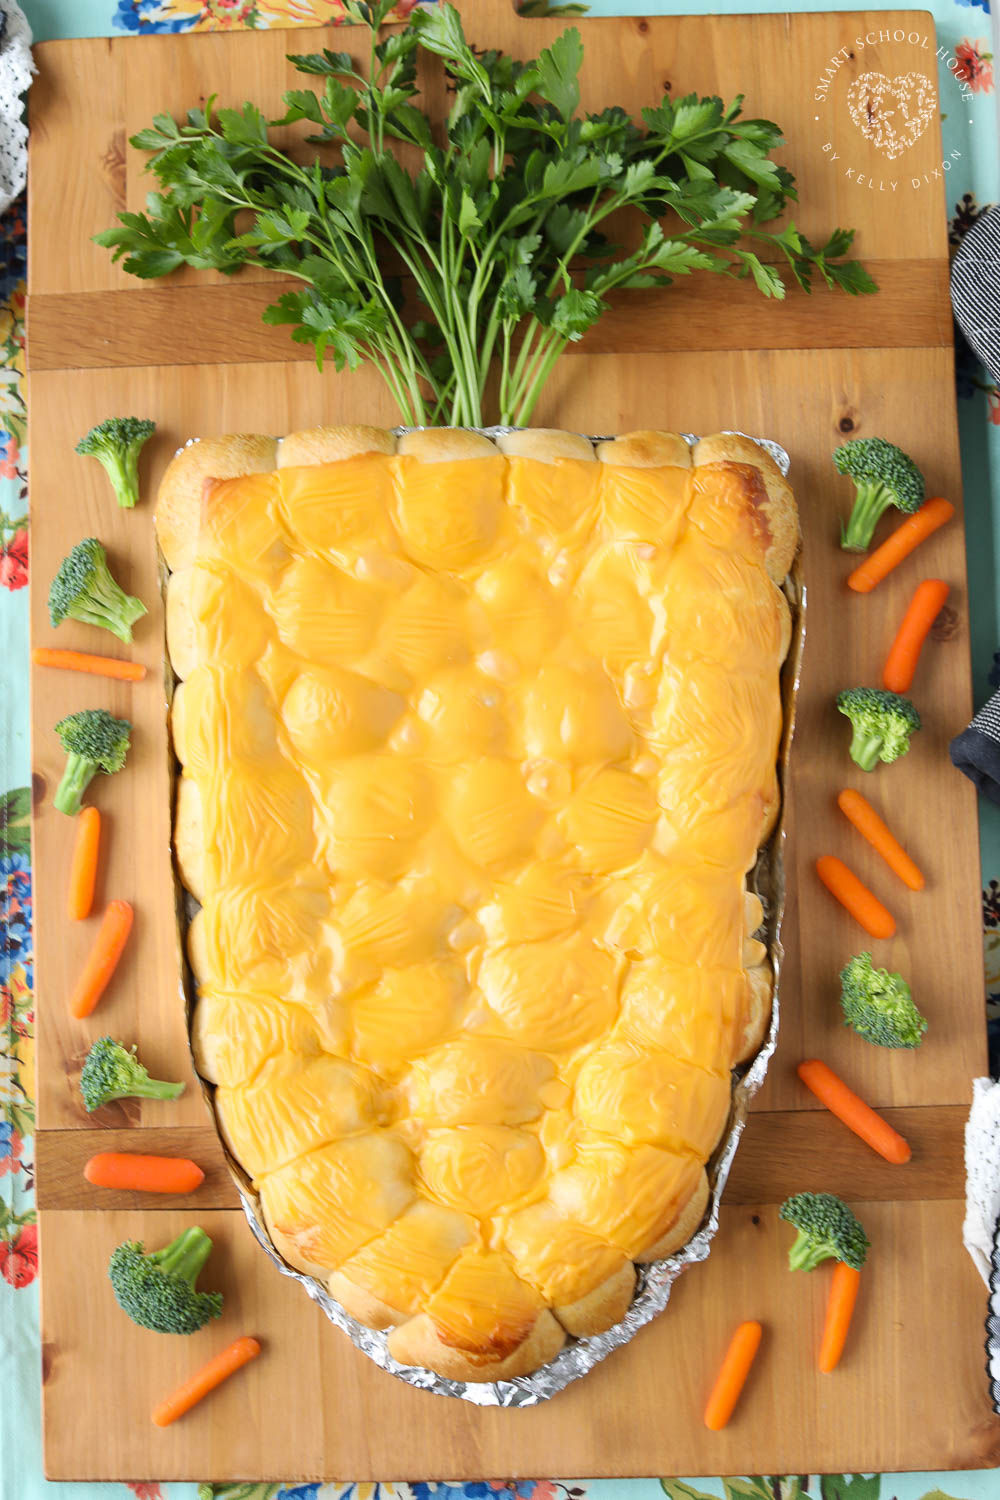 Cheesy Carrot Shaped Pull Apart Bread is made of everyone's favorite buttery biscuits rolled around cheese and shaped into a cute carrot.